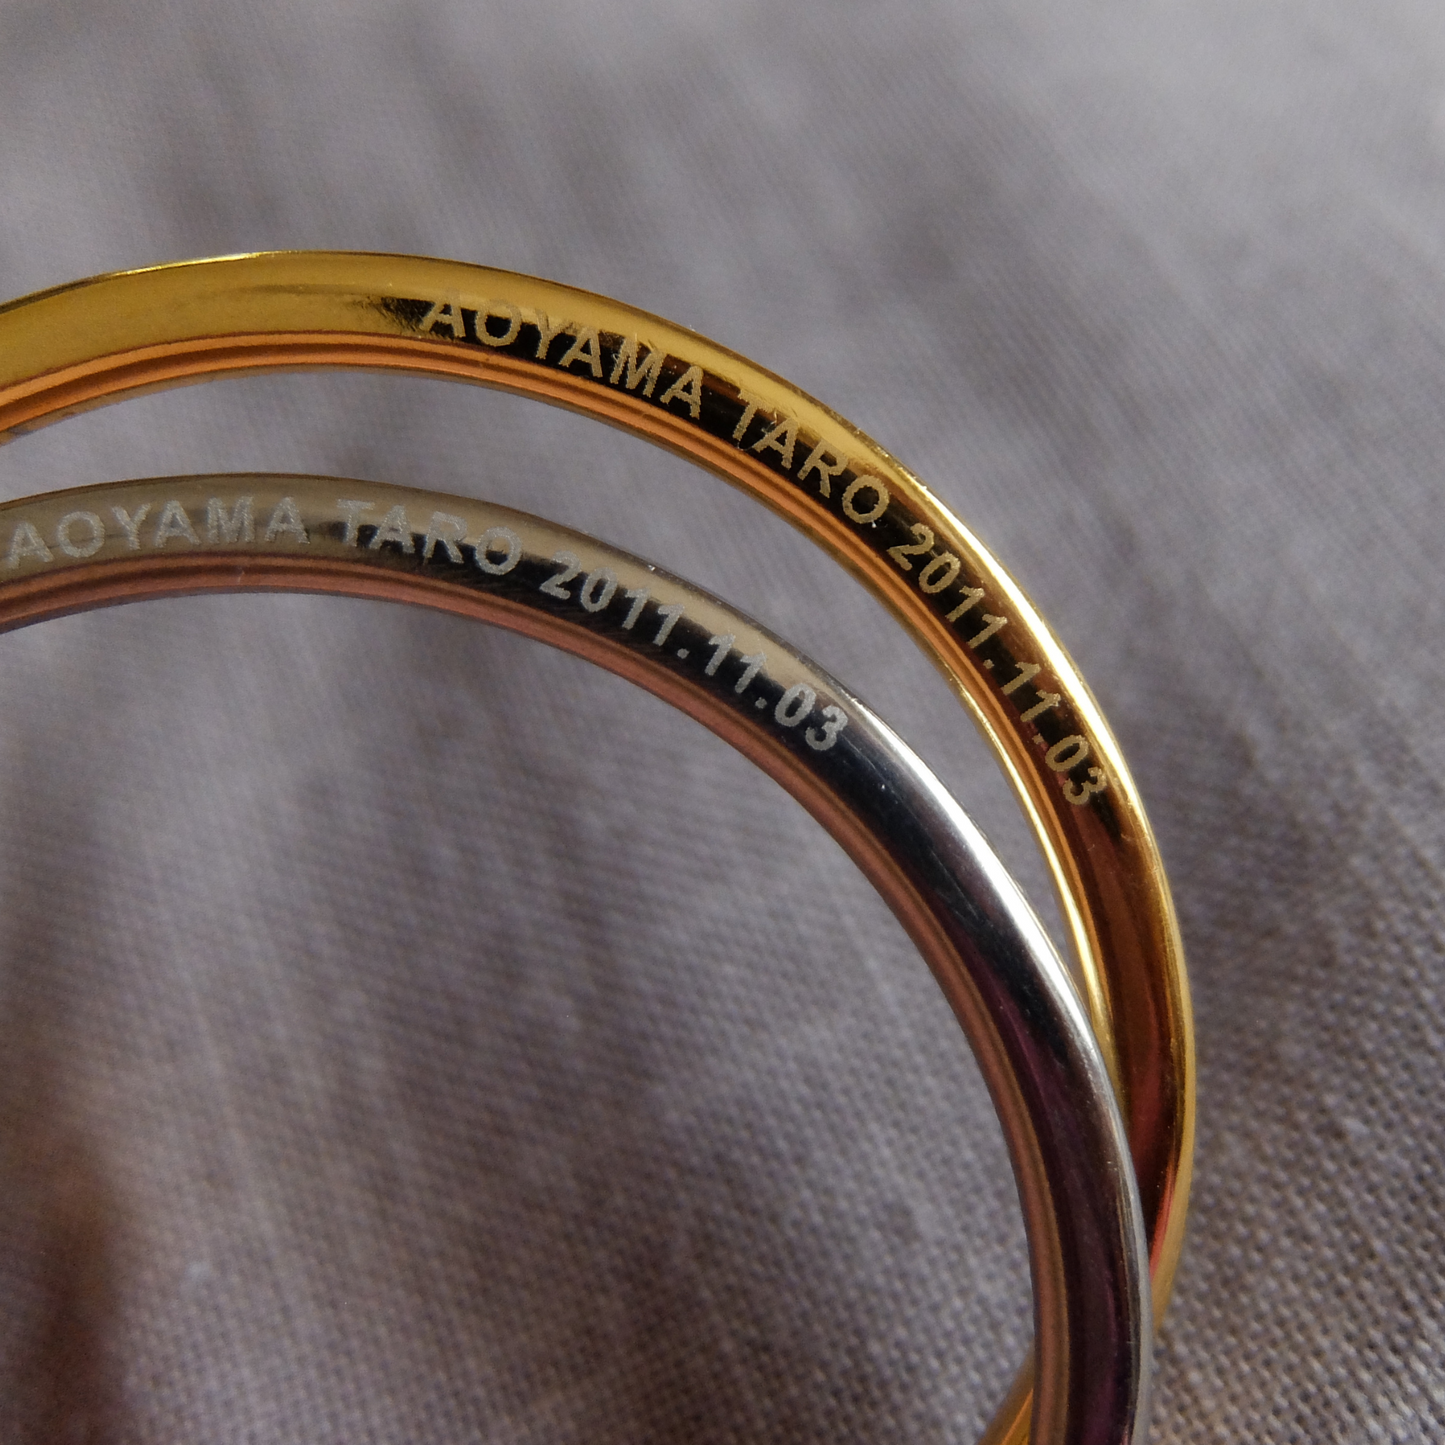 Optional: engraving on the ring